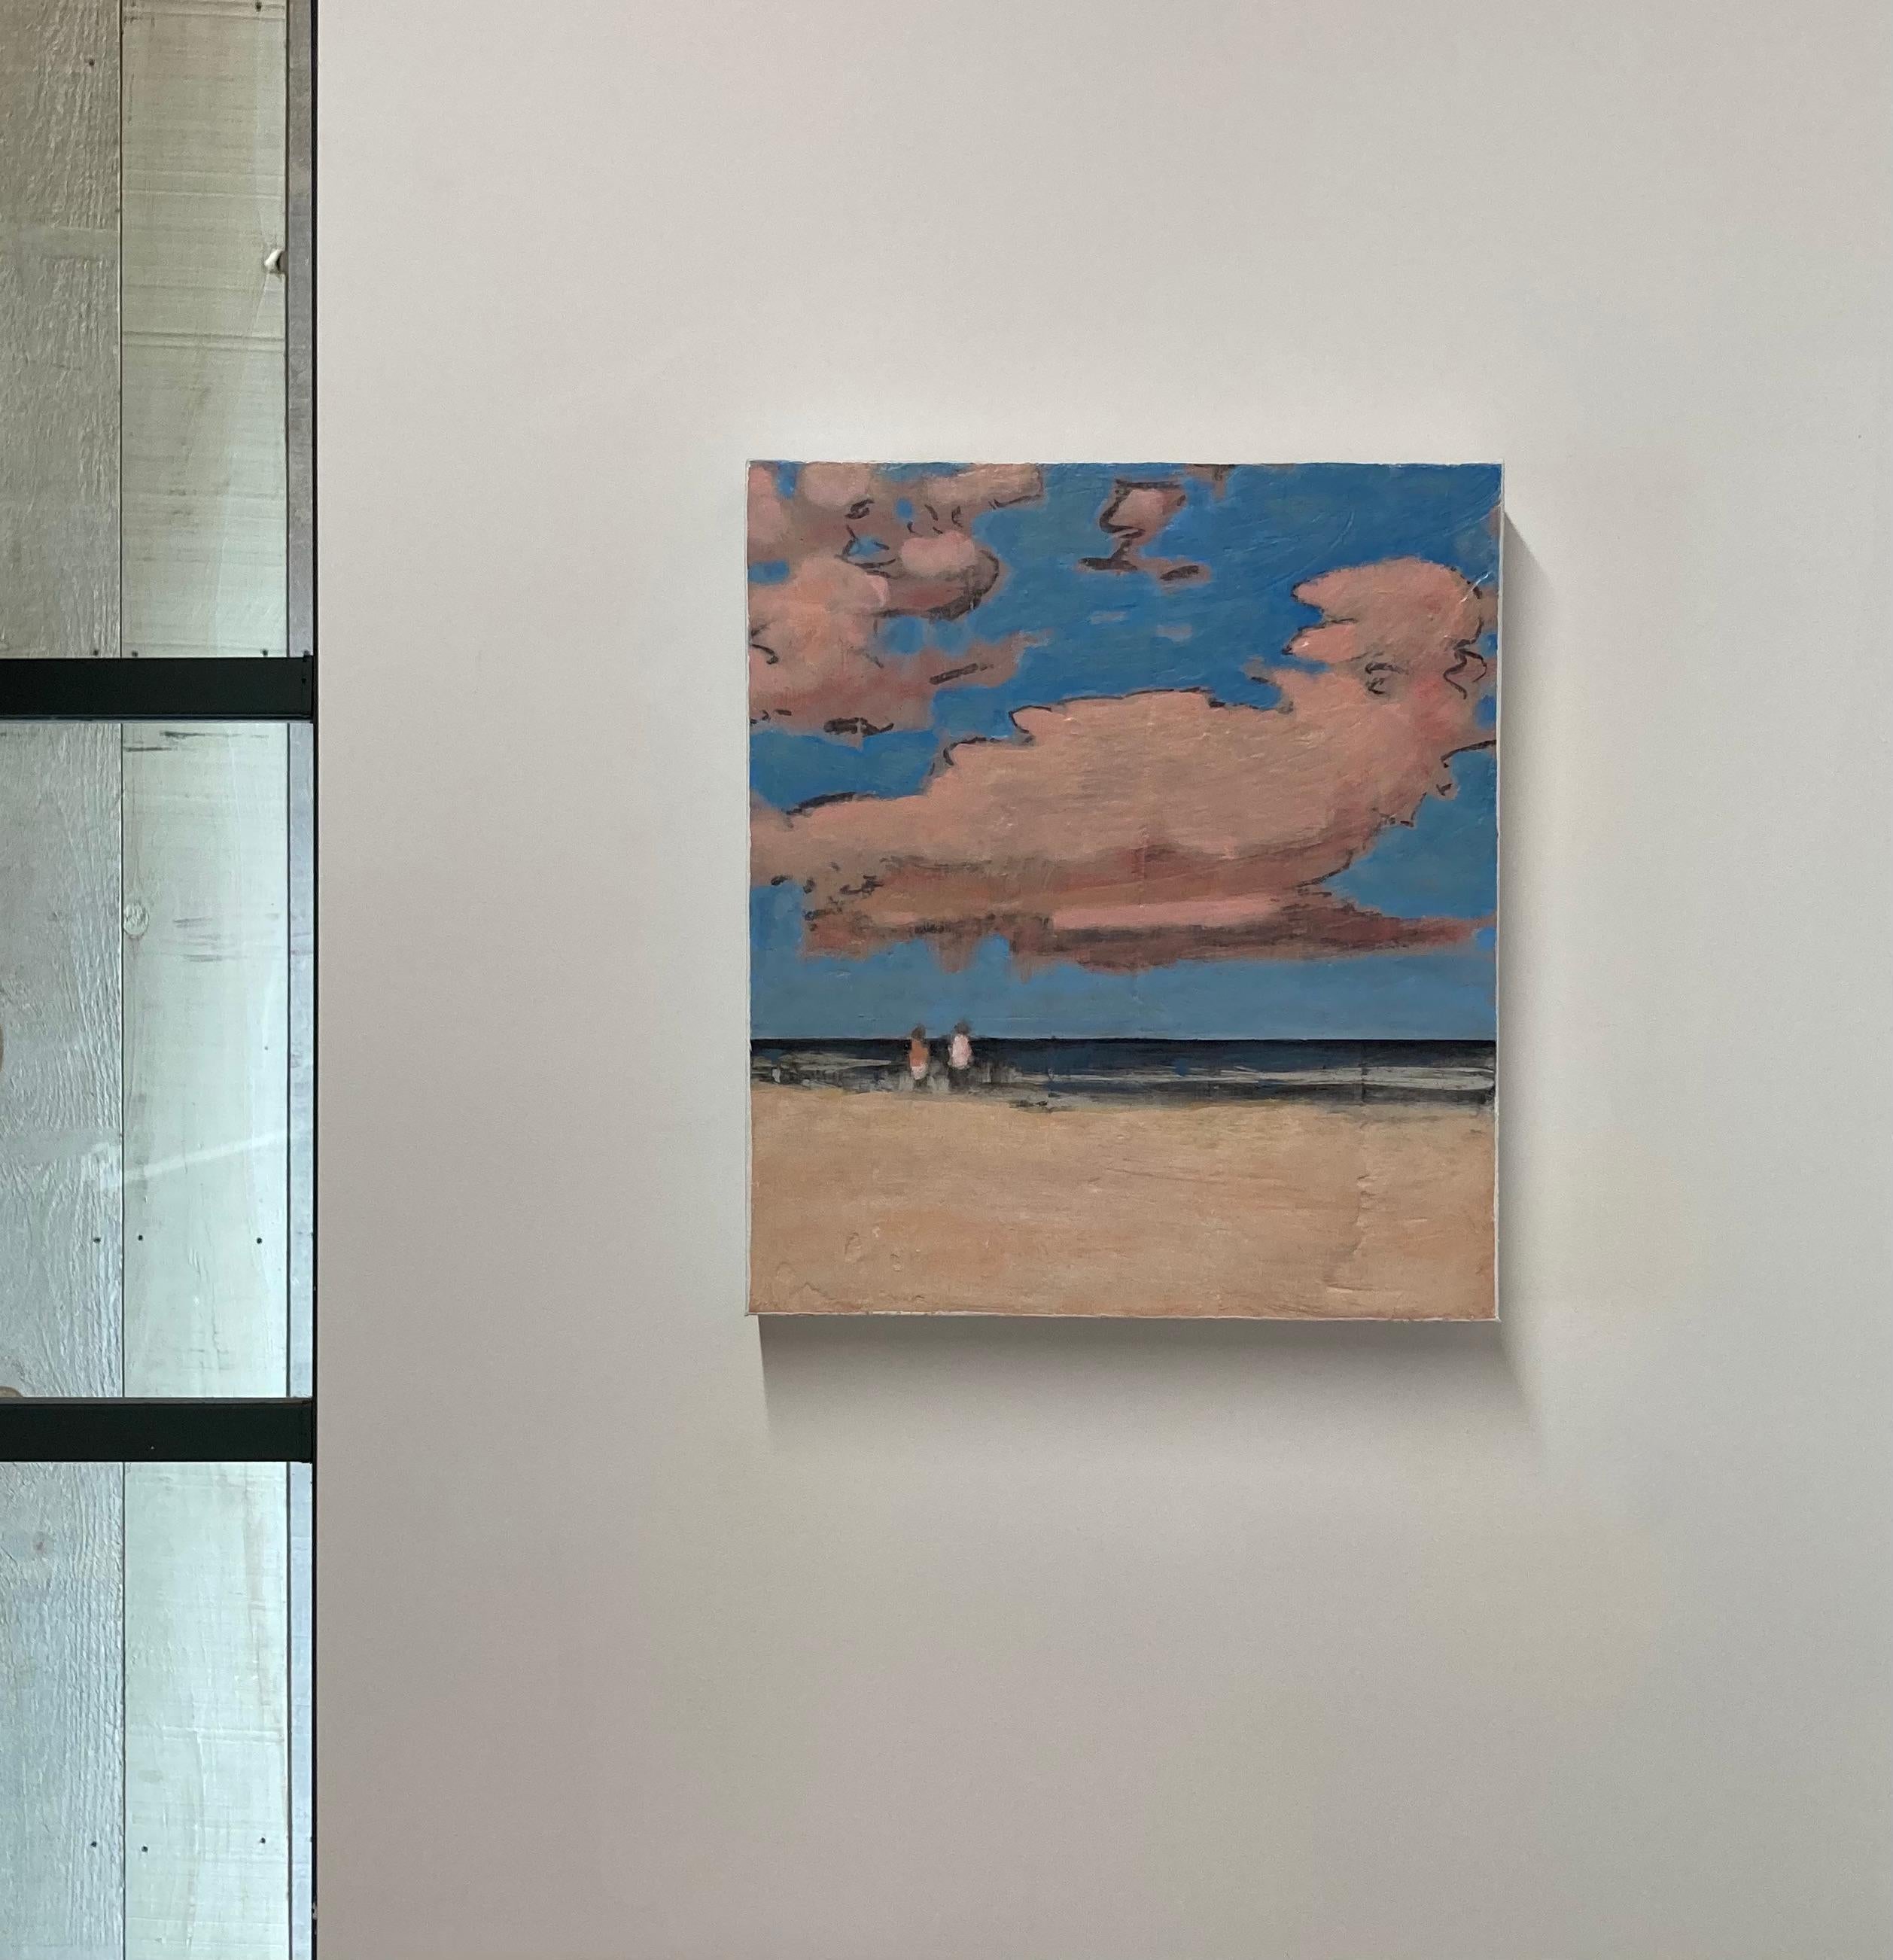 Eleven O-Five, Pale Salmon Pink Sand, Clouds, Blue Sky, Summer Beach, Beachscape - Contemporary Painting by David Konigsberg